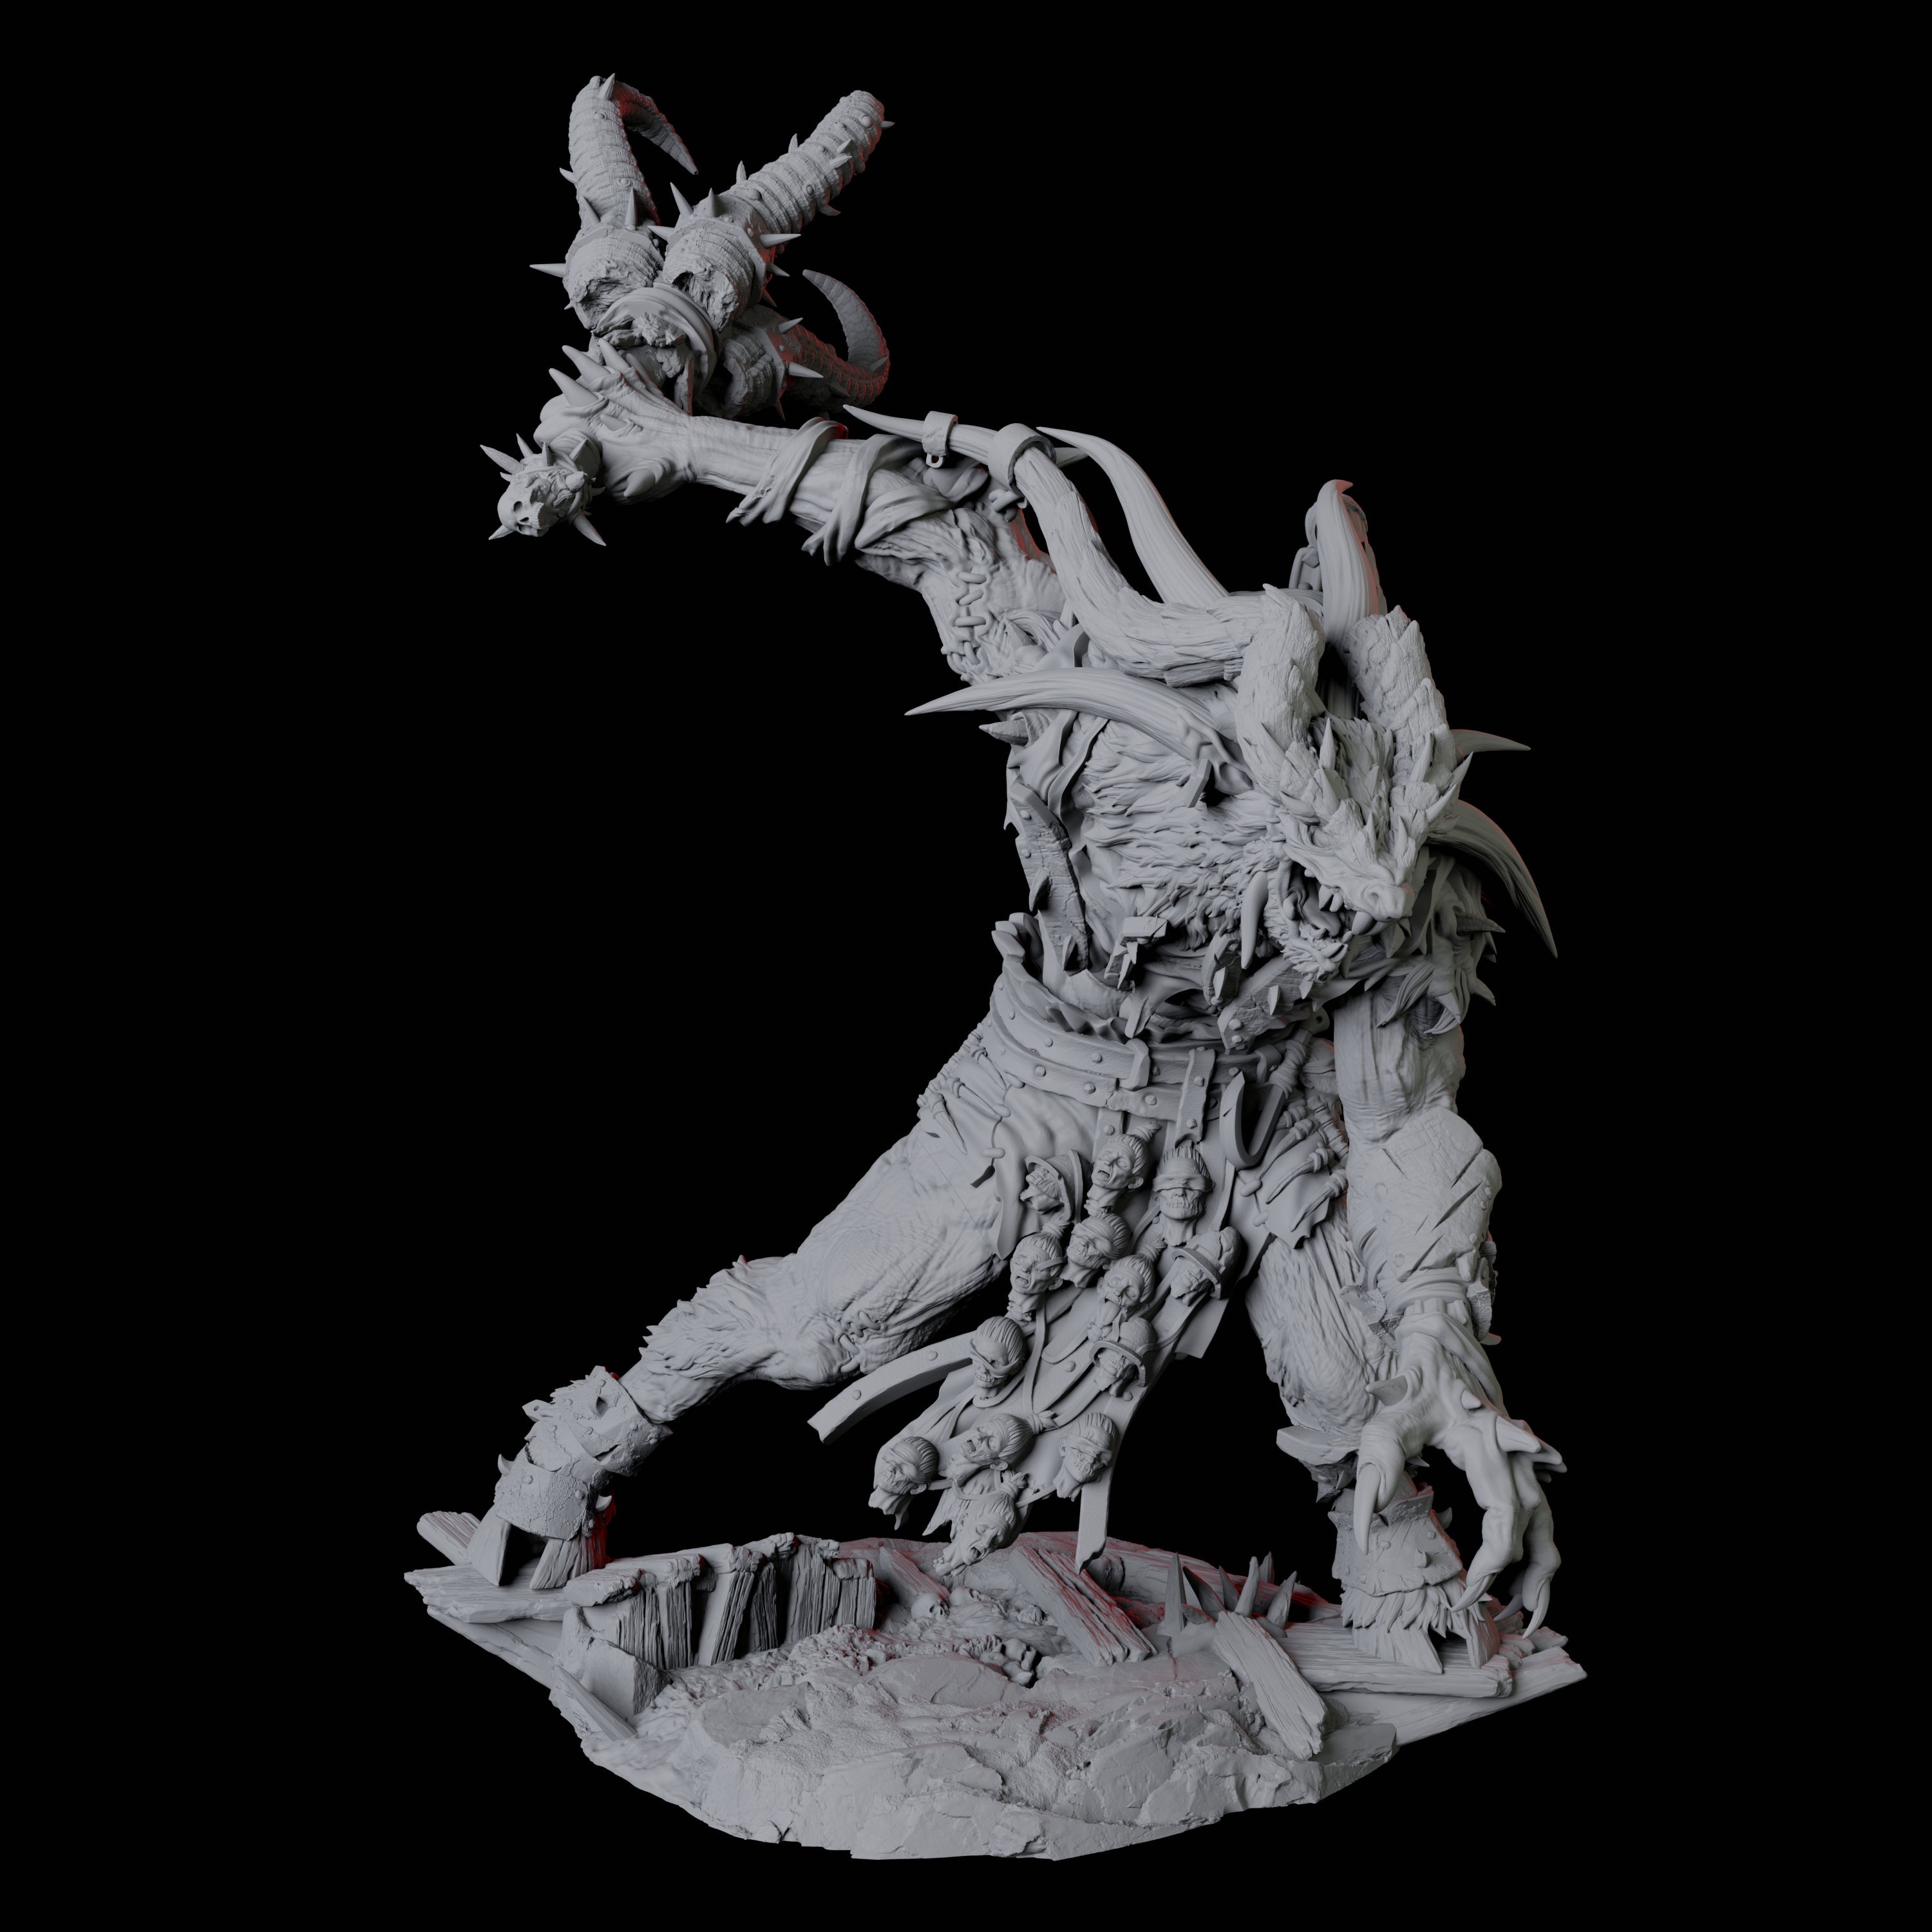 Four Giant Ratfolk Barbarians Miniature for Dungeons and Dragons, Pathfinder or other TTRPGs